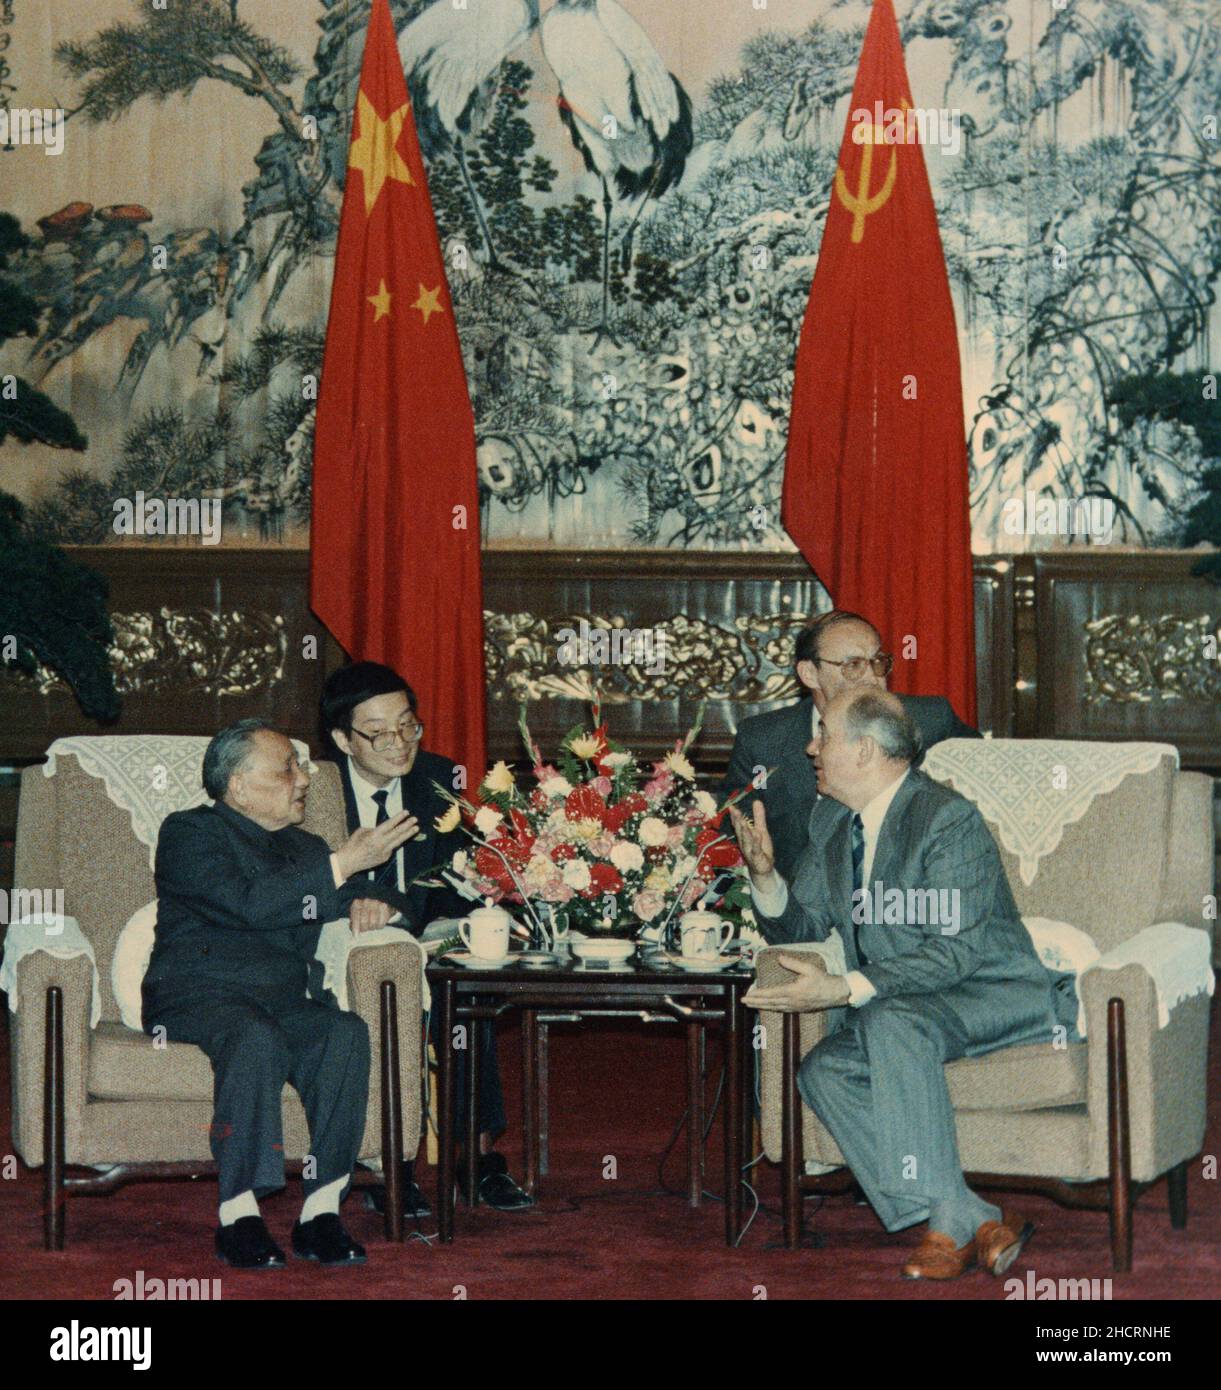 China's Deng Xiaoping meets with Soviet leader Mikhail Gorbachev in the Great Hall of the People in Beijing in 1989. Stock Photo